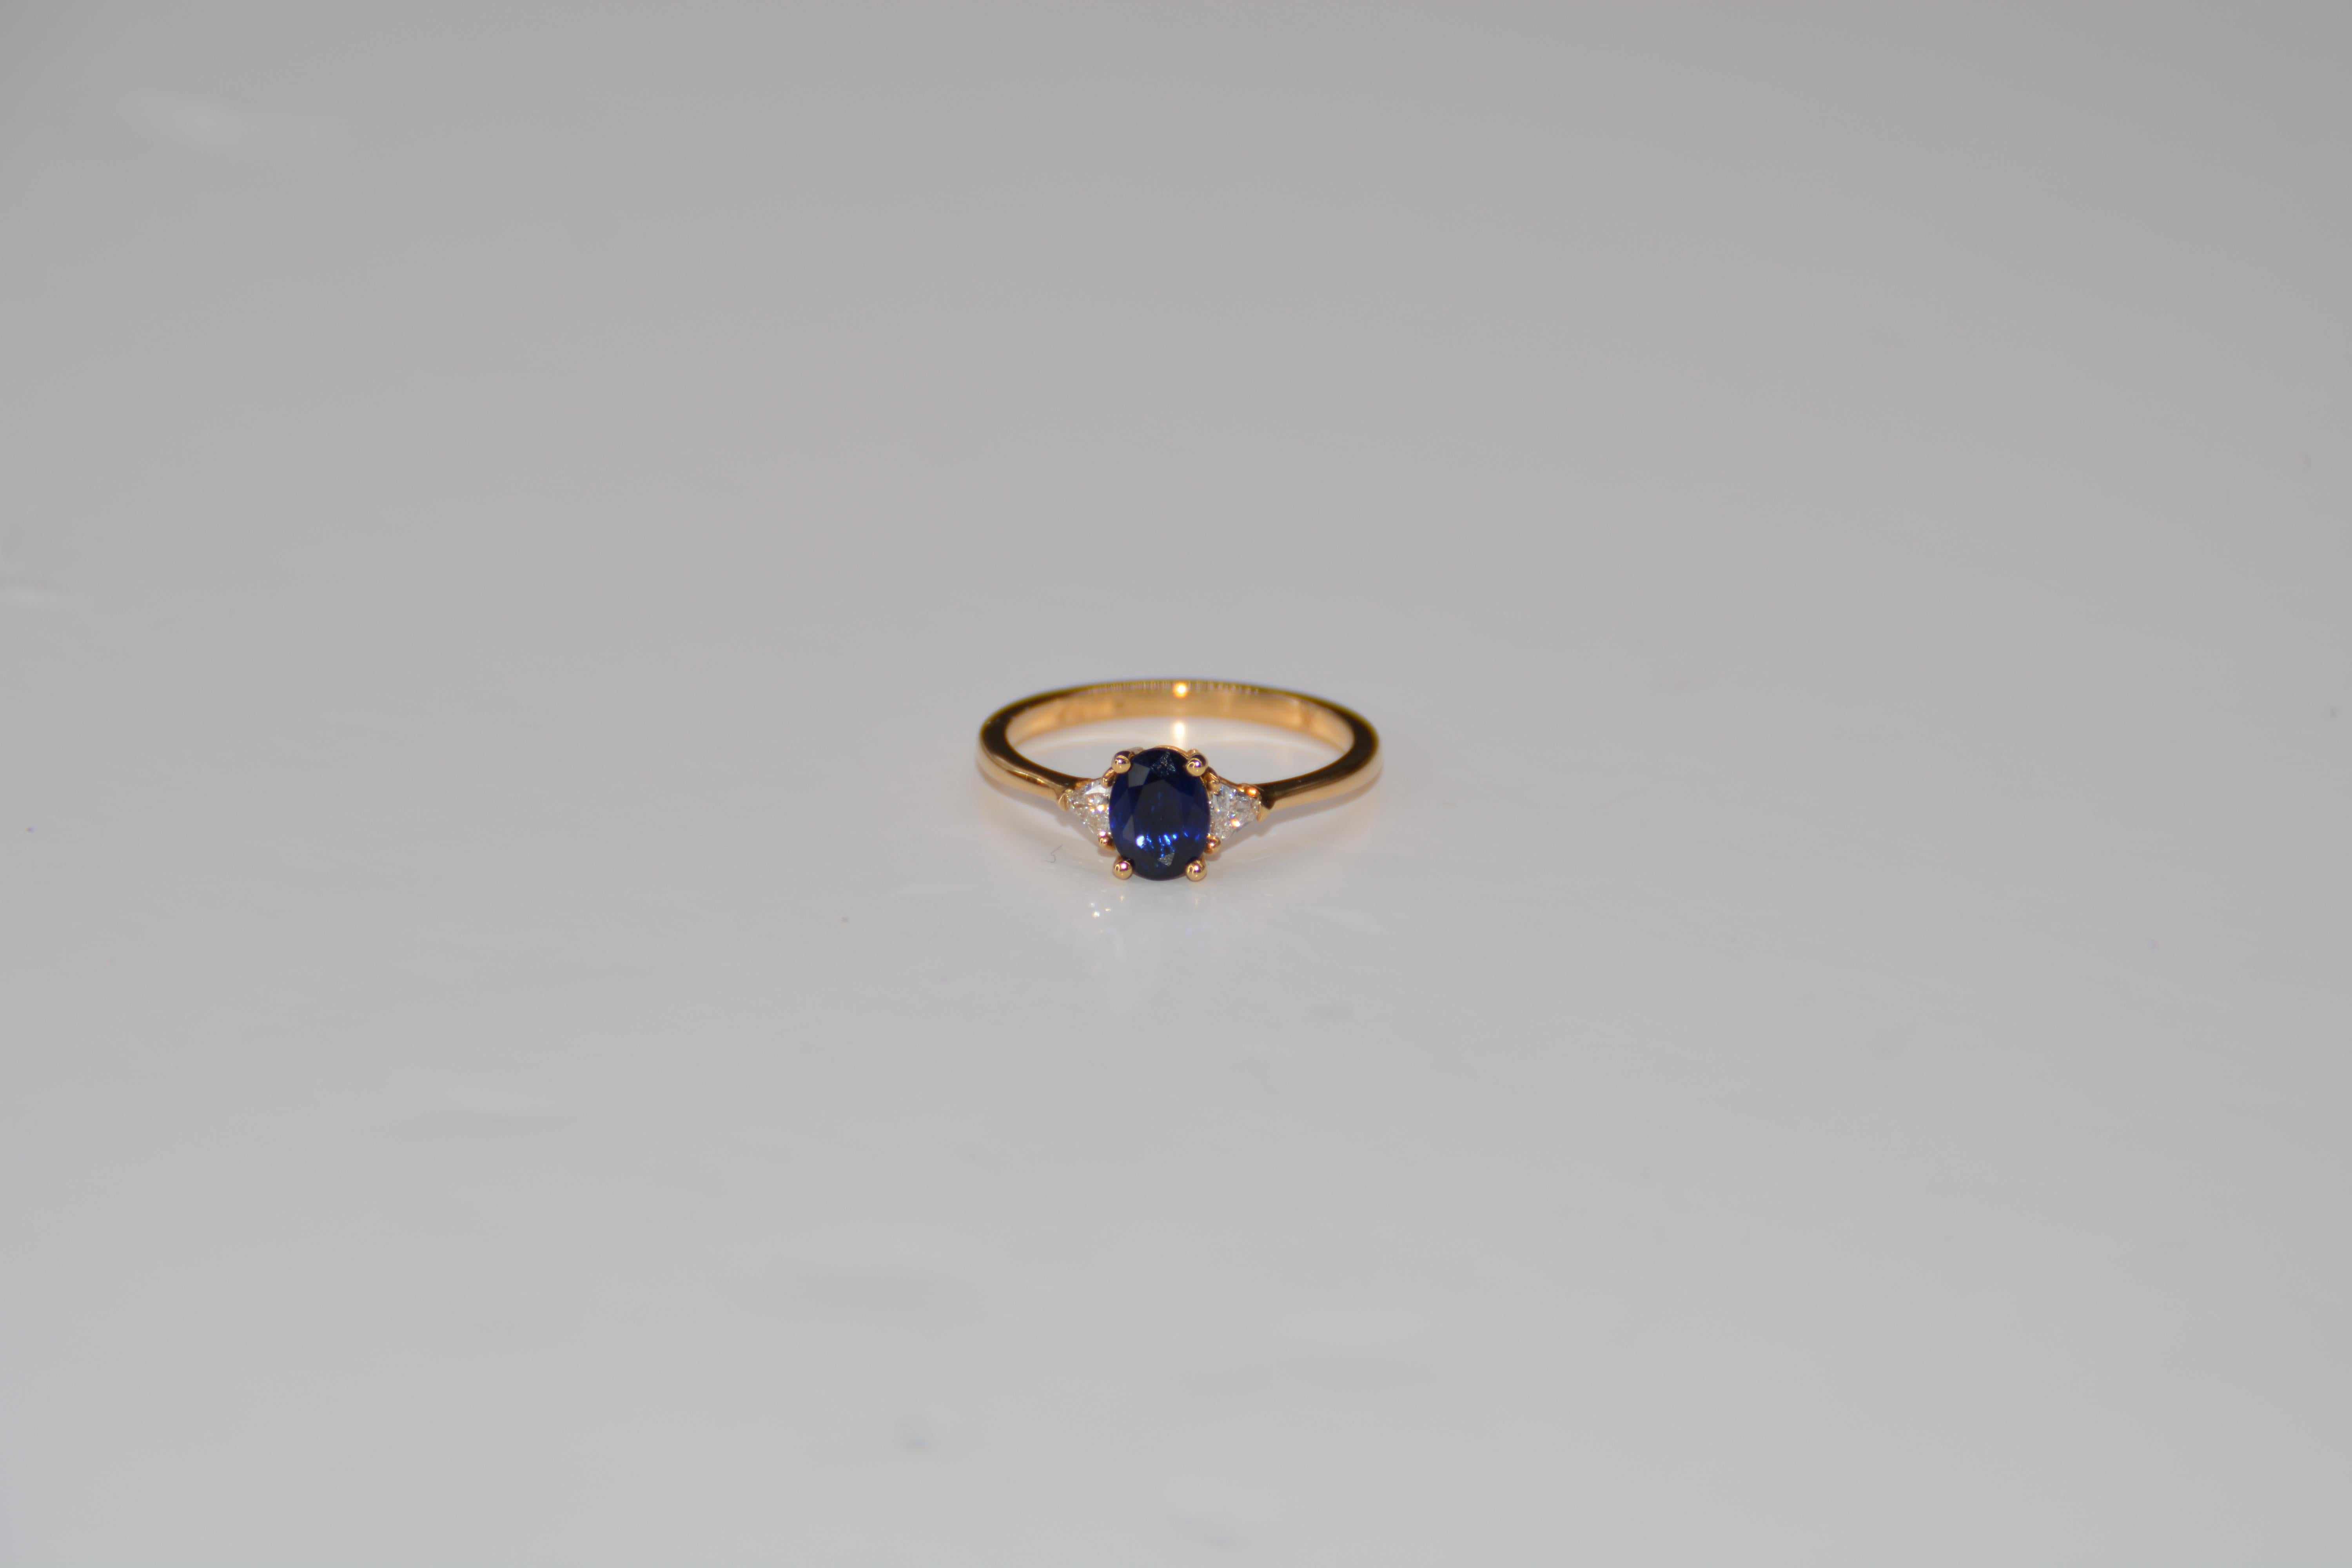 Engagement Ring Sapphire Diamonds Yellow Gold 

Mesure et Art du Temps offers you this 18 carat yellow gold, sapphire and diamond engagement ring. In the center of the ring, a sublime oval-sized sapphire, weighing 0.730 carats. On each side of this